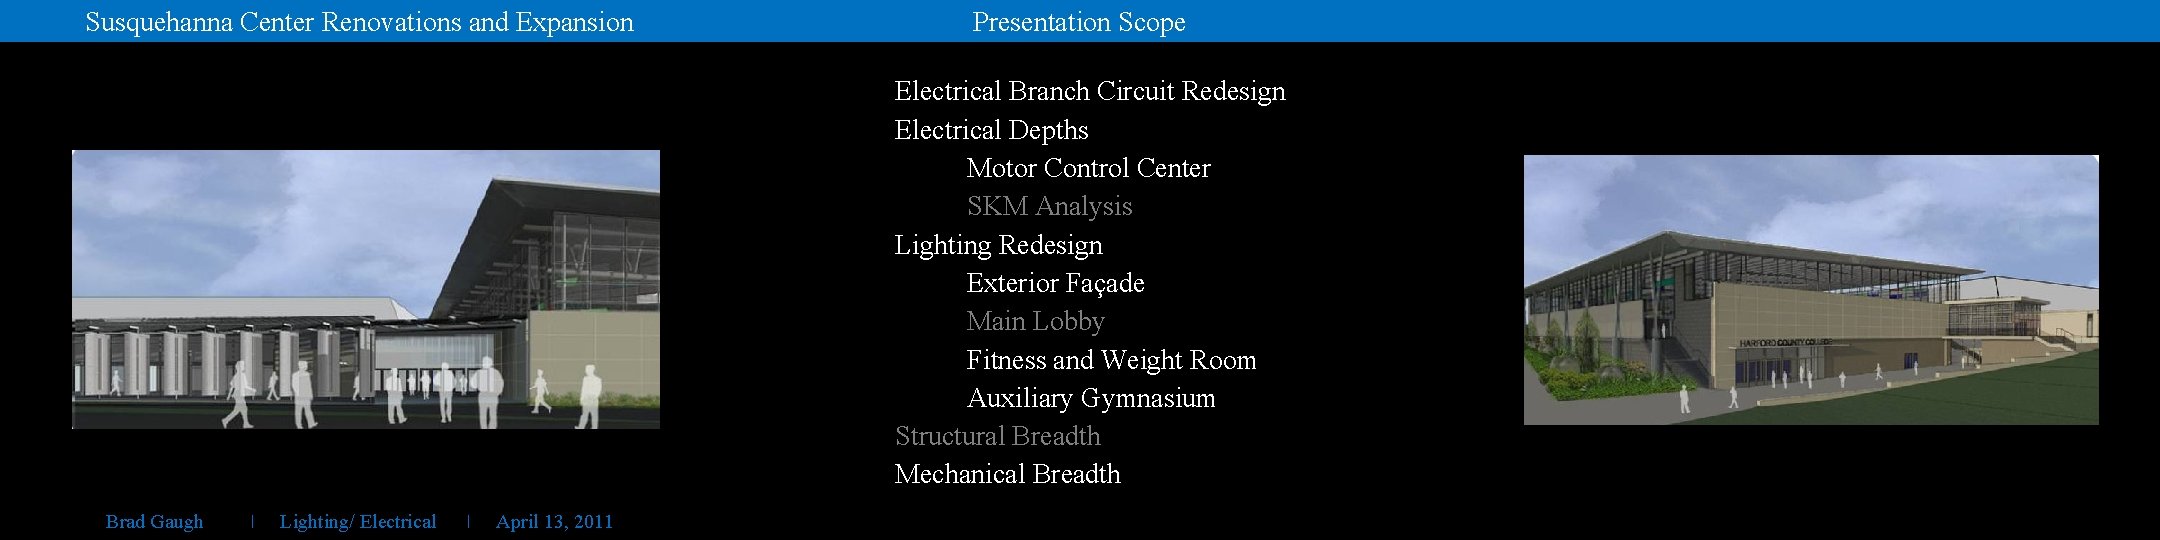 Susquehanna Center Renovations and Expansion Presentation Scope Electrical Branch Circuit Redesign Electrical Depths Motor